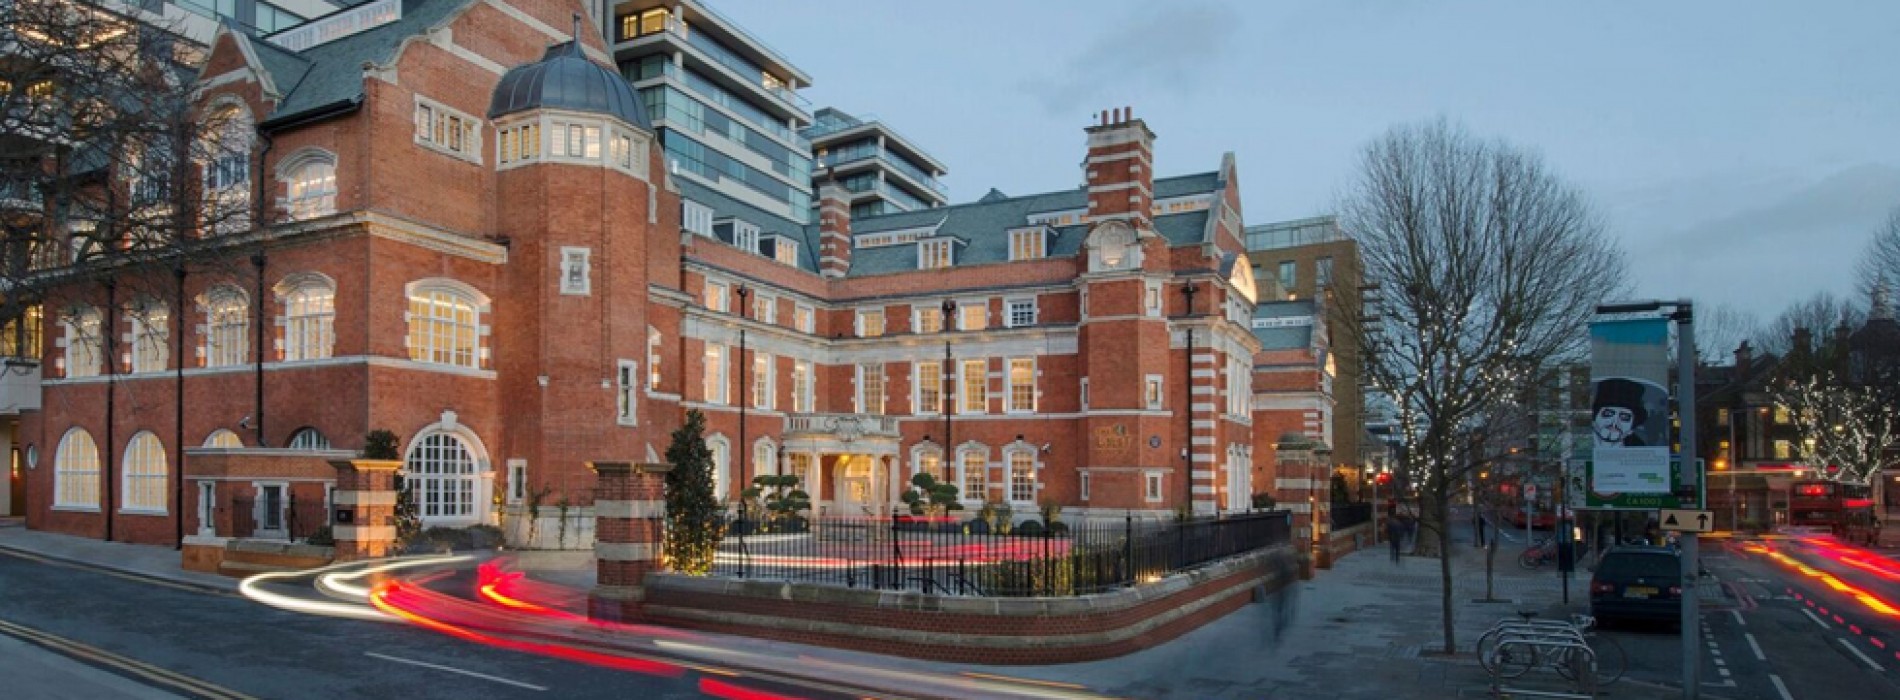 Small Luxury hotels of the World™ welcomes The LaLiT London